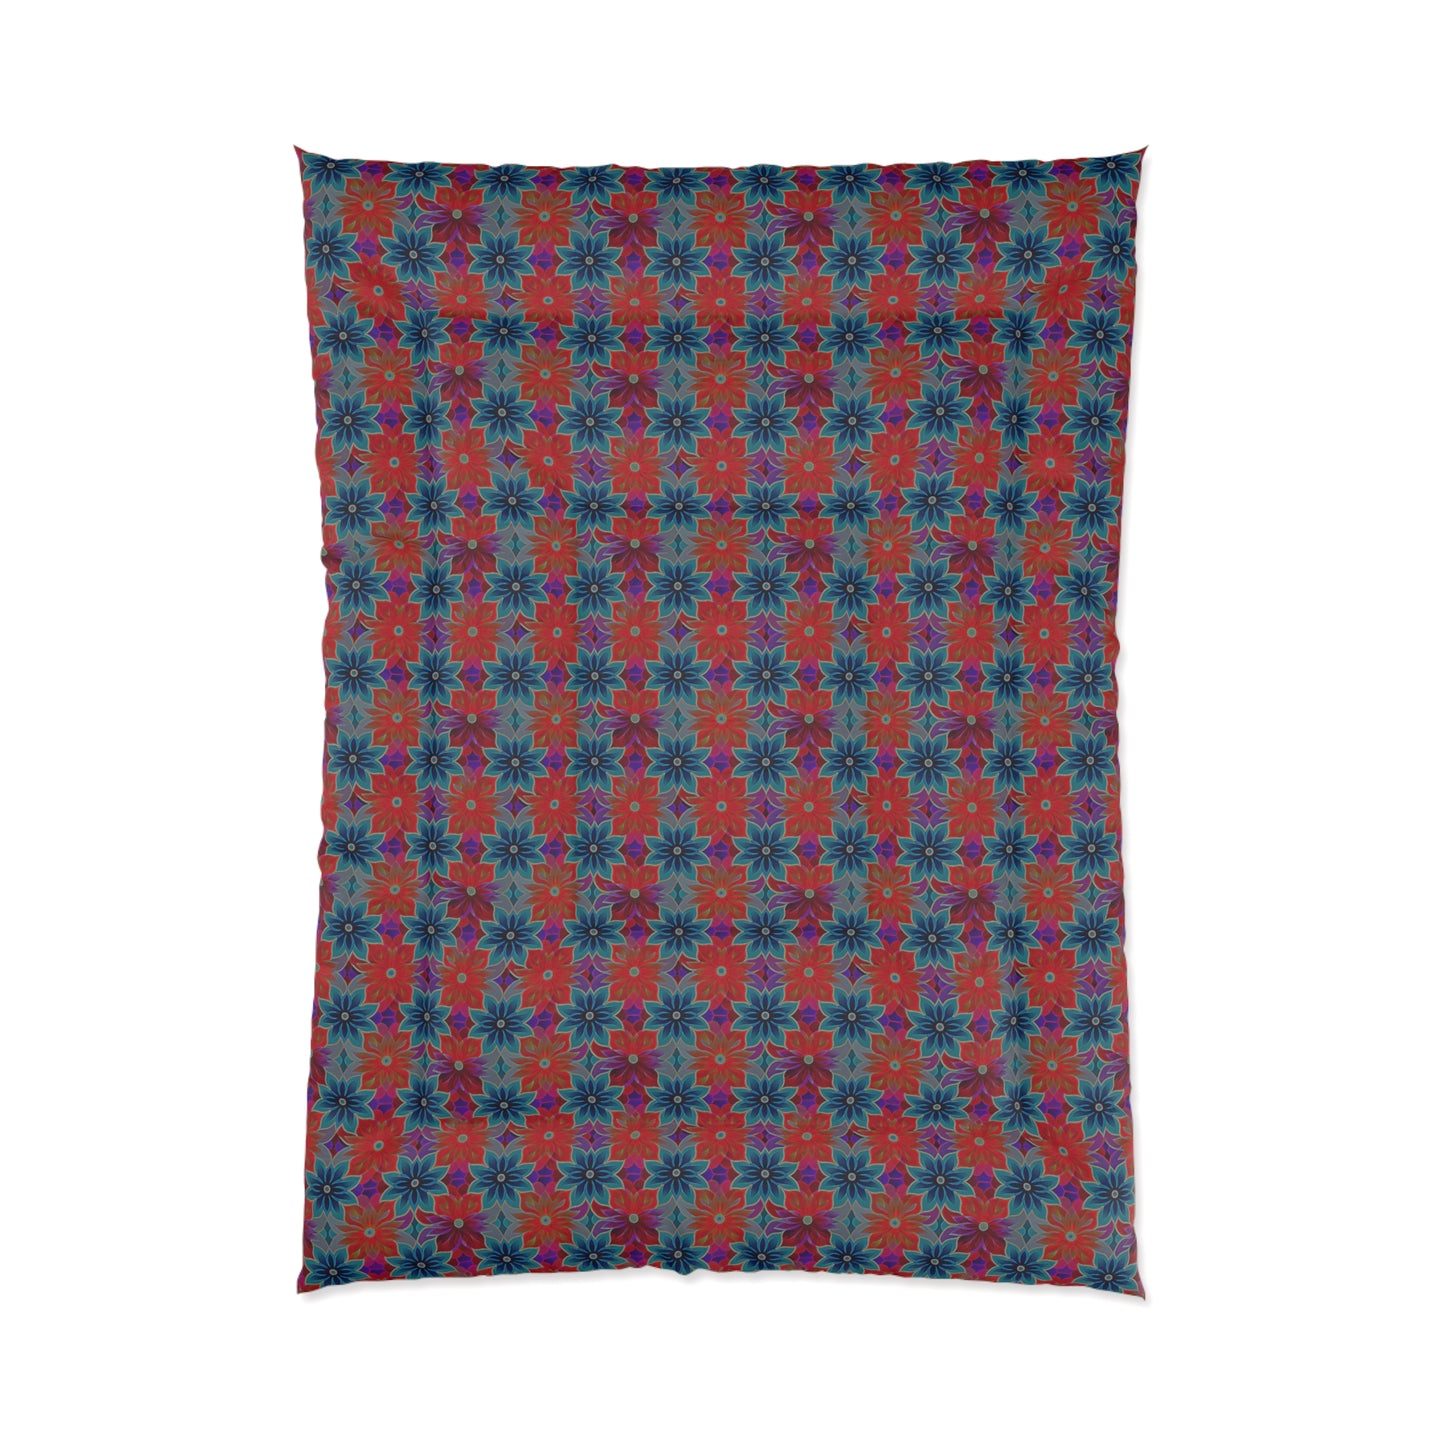 Blue and Red Flower Pattern Comforter